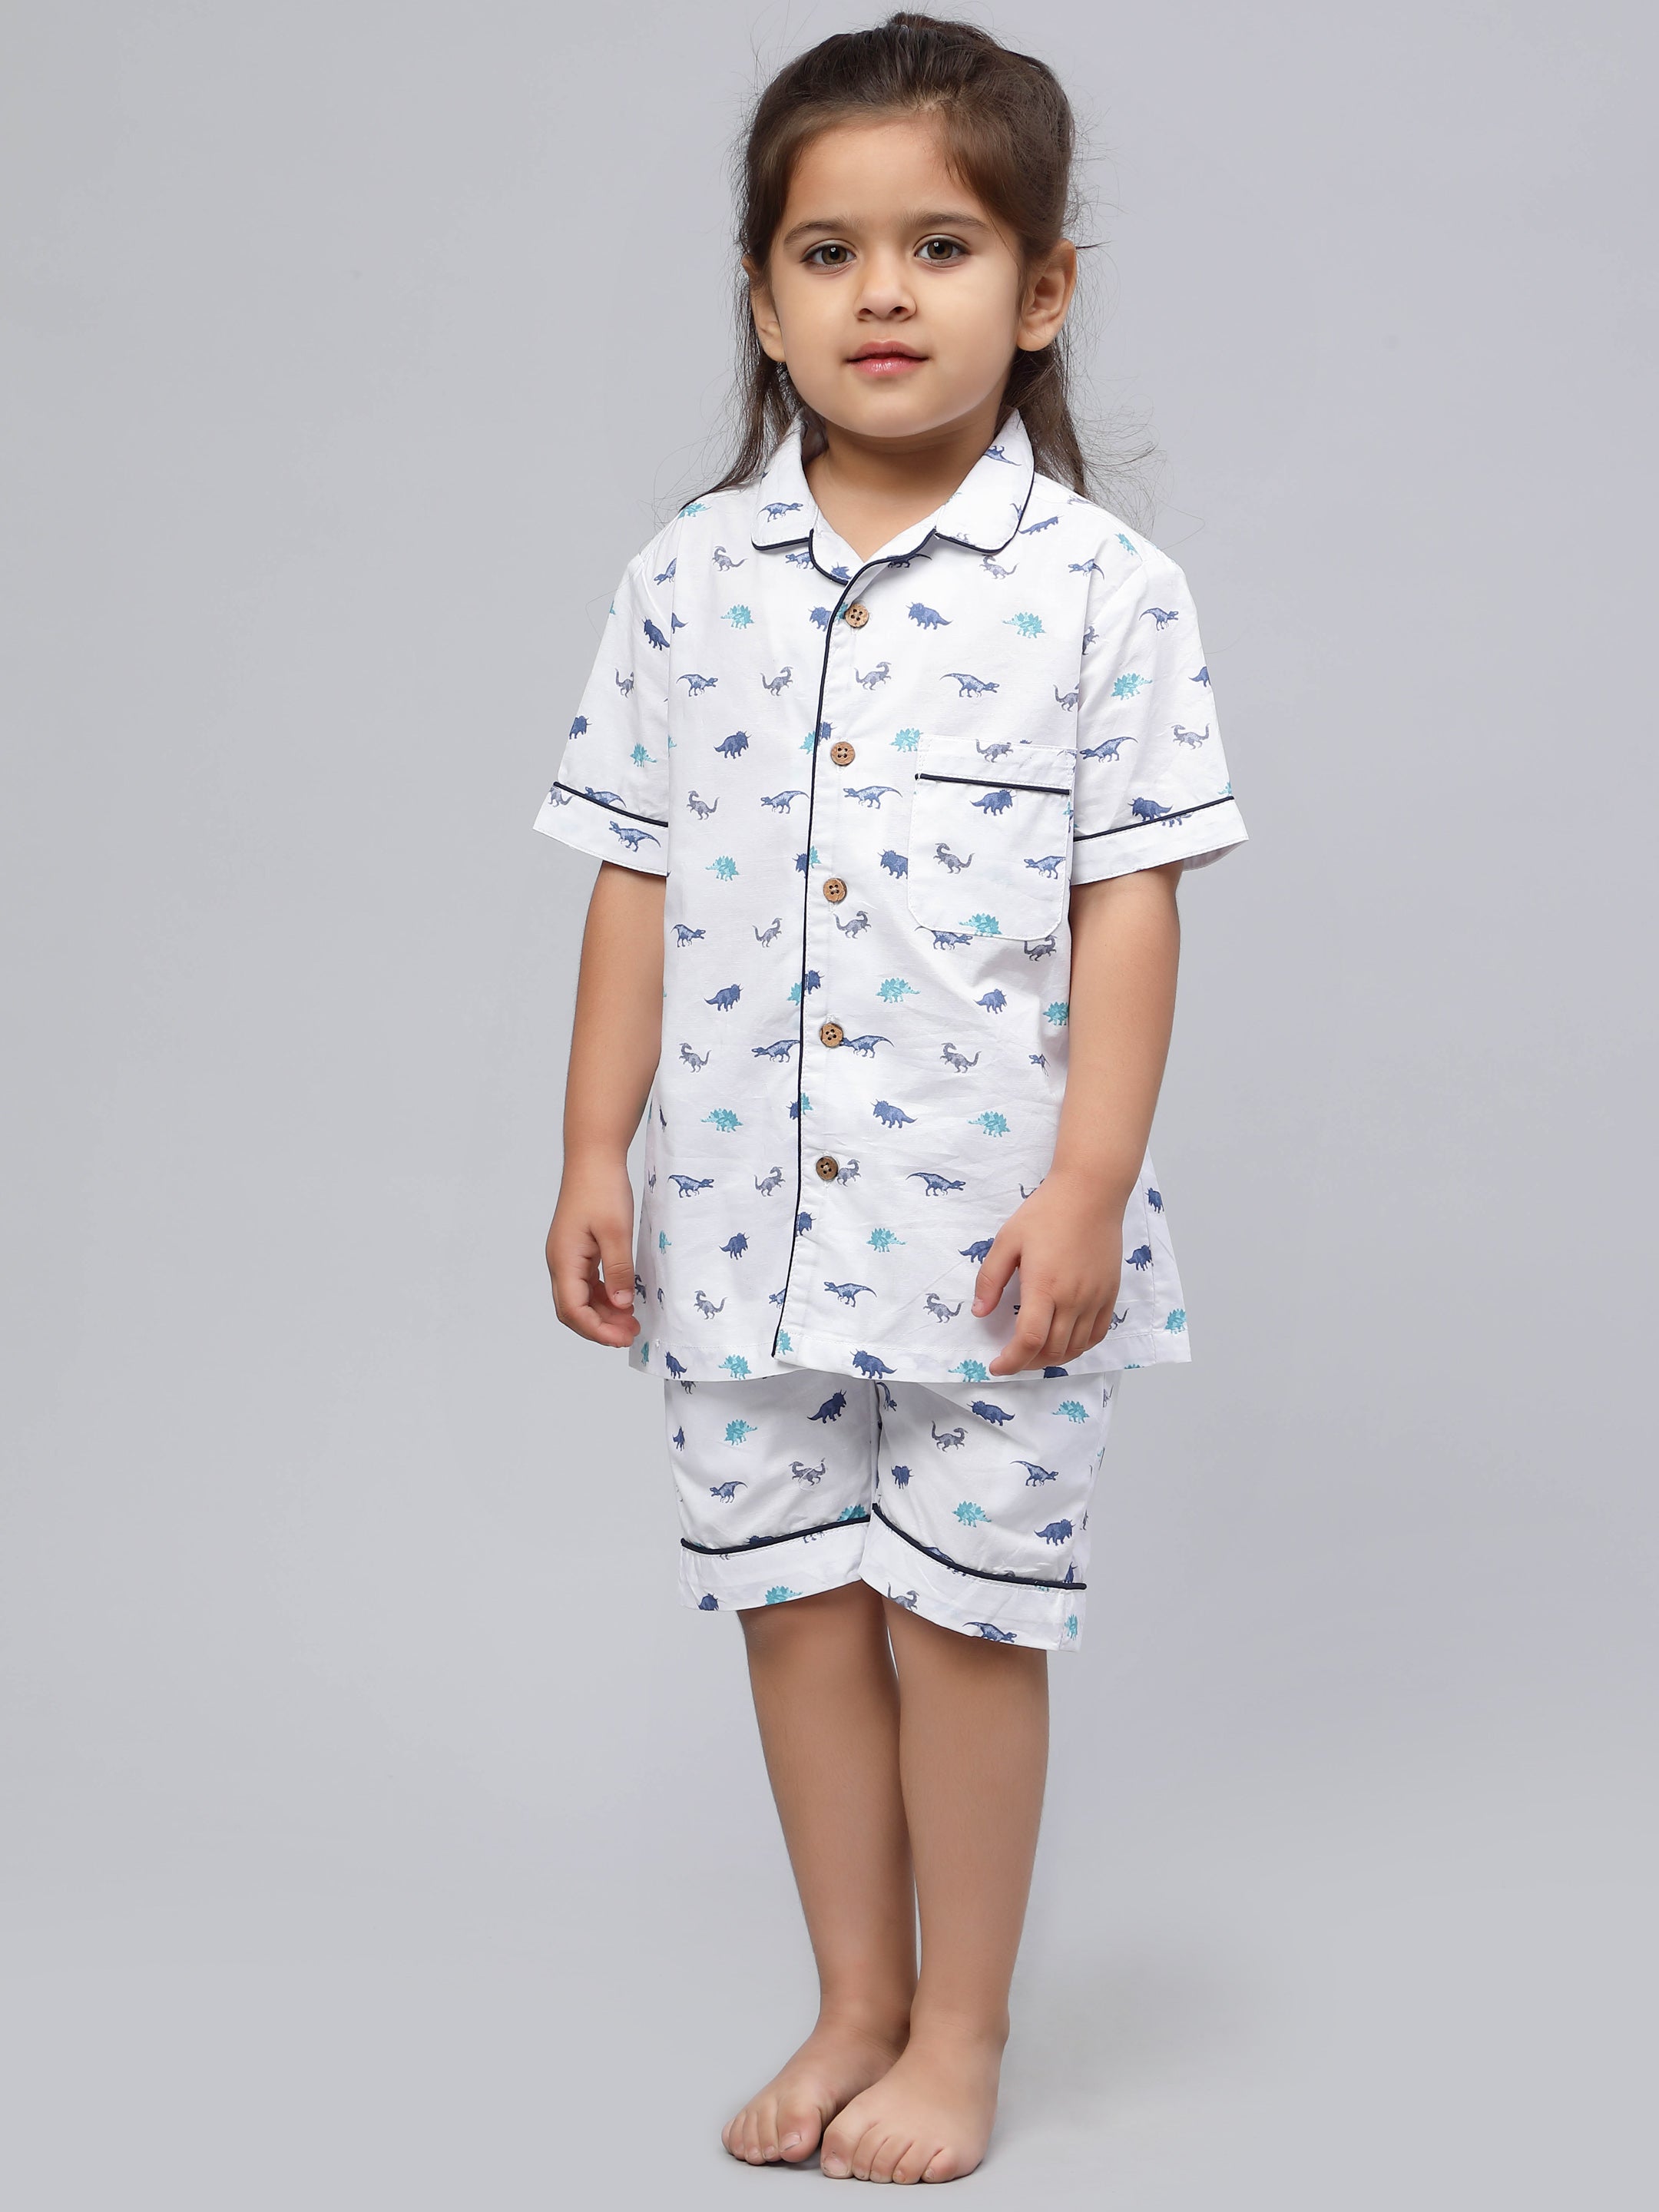 Buy Blue Color Full Sets Night Wear Plain collar Night Dress- Blue Clothing  for Girl Jollee